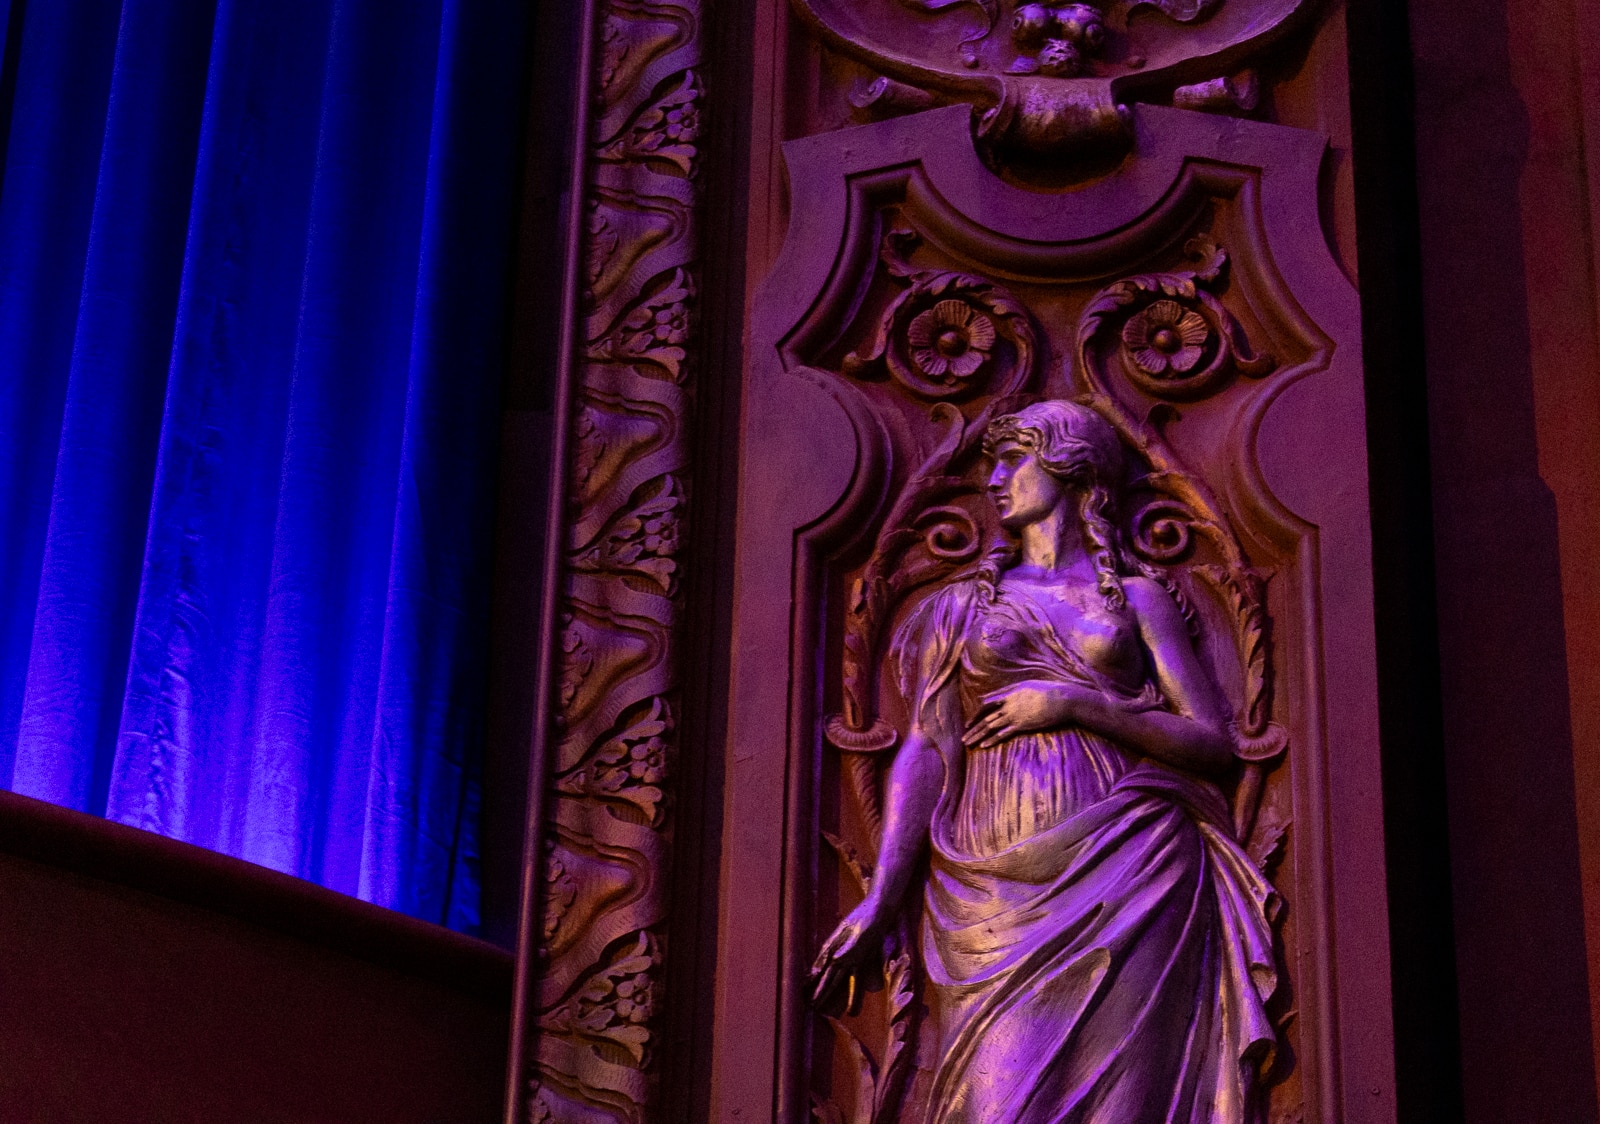 the figure of a woman amidst the ornamental details in the main auditorium